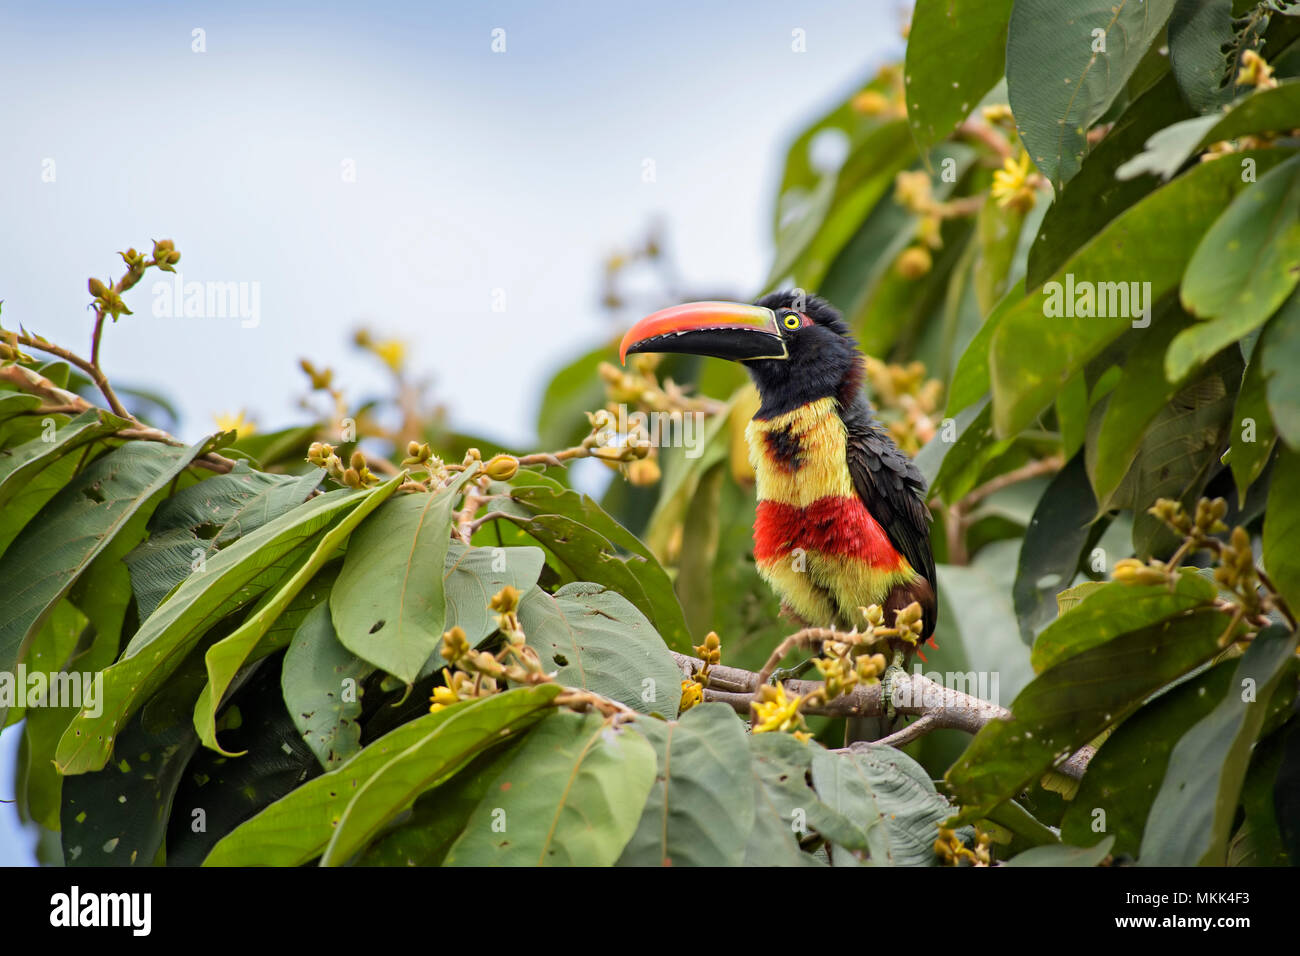 Fiery-billed Aracari - Pteroglossus frantzii, beautiful colorful toucan from Costa Rica forest. Stock Photo